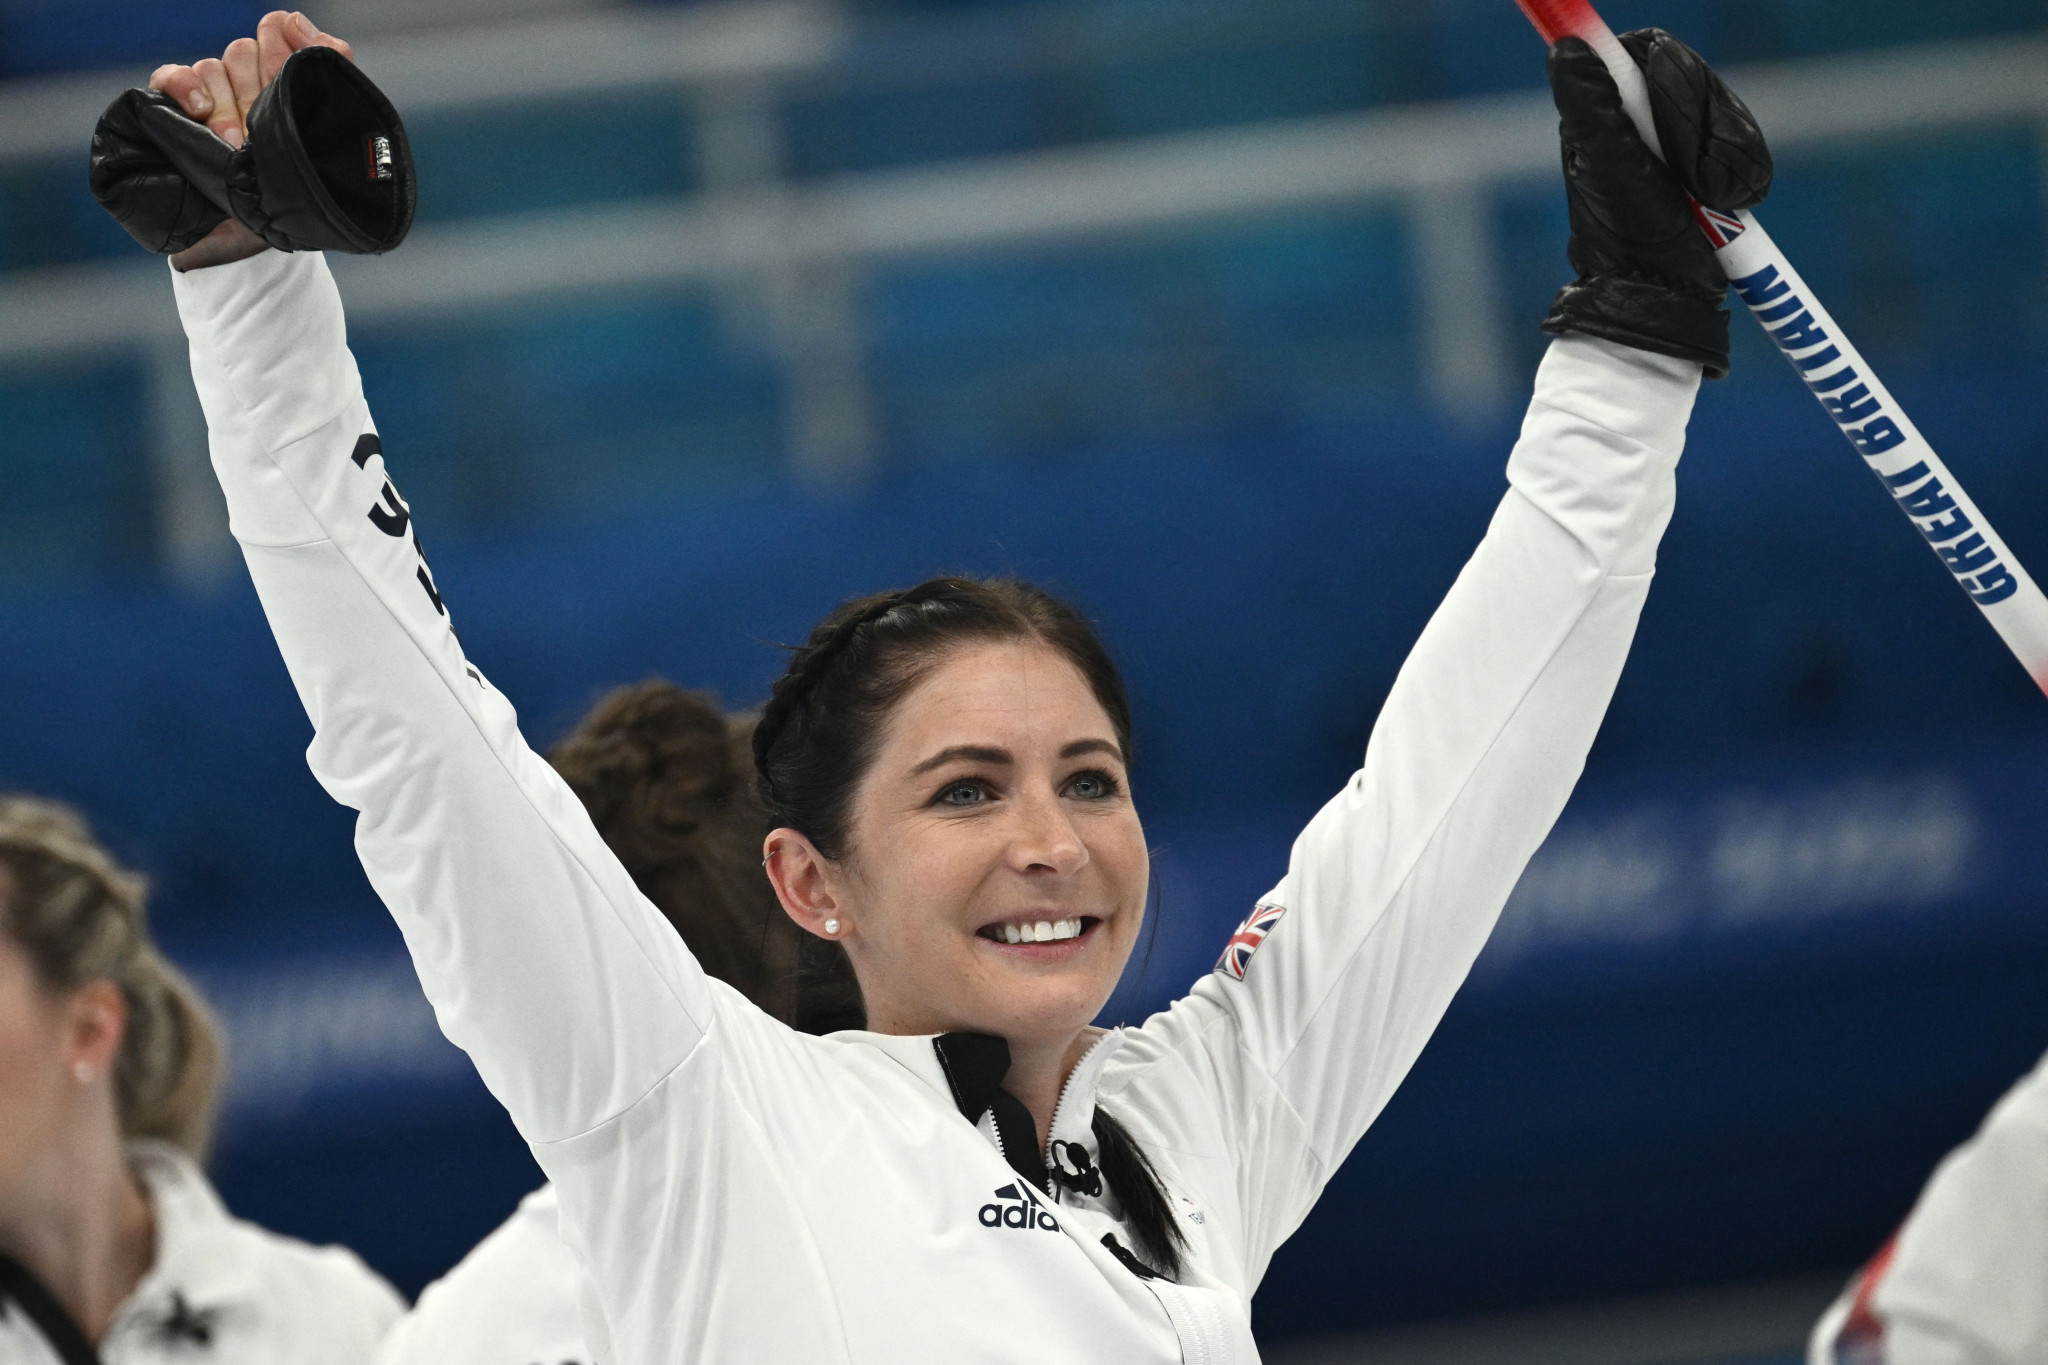 Olympic curling champion Muirhead announces retirement six months after Beijing 2022 gold